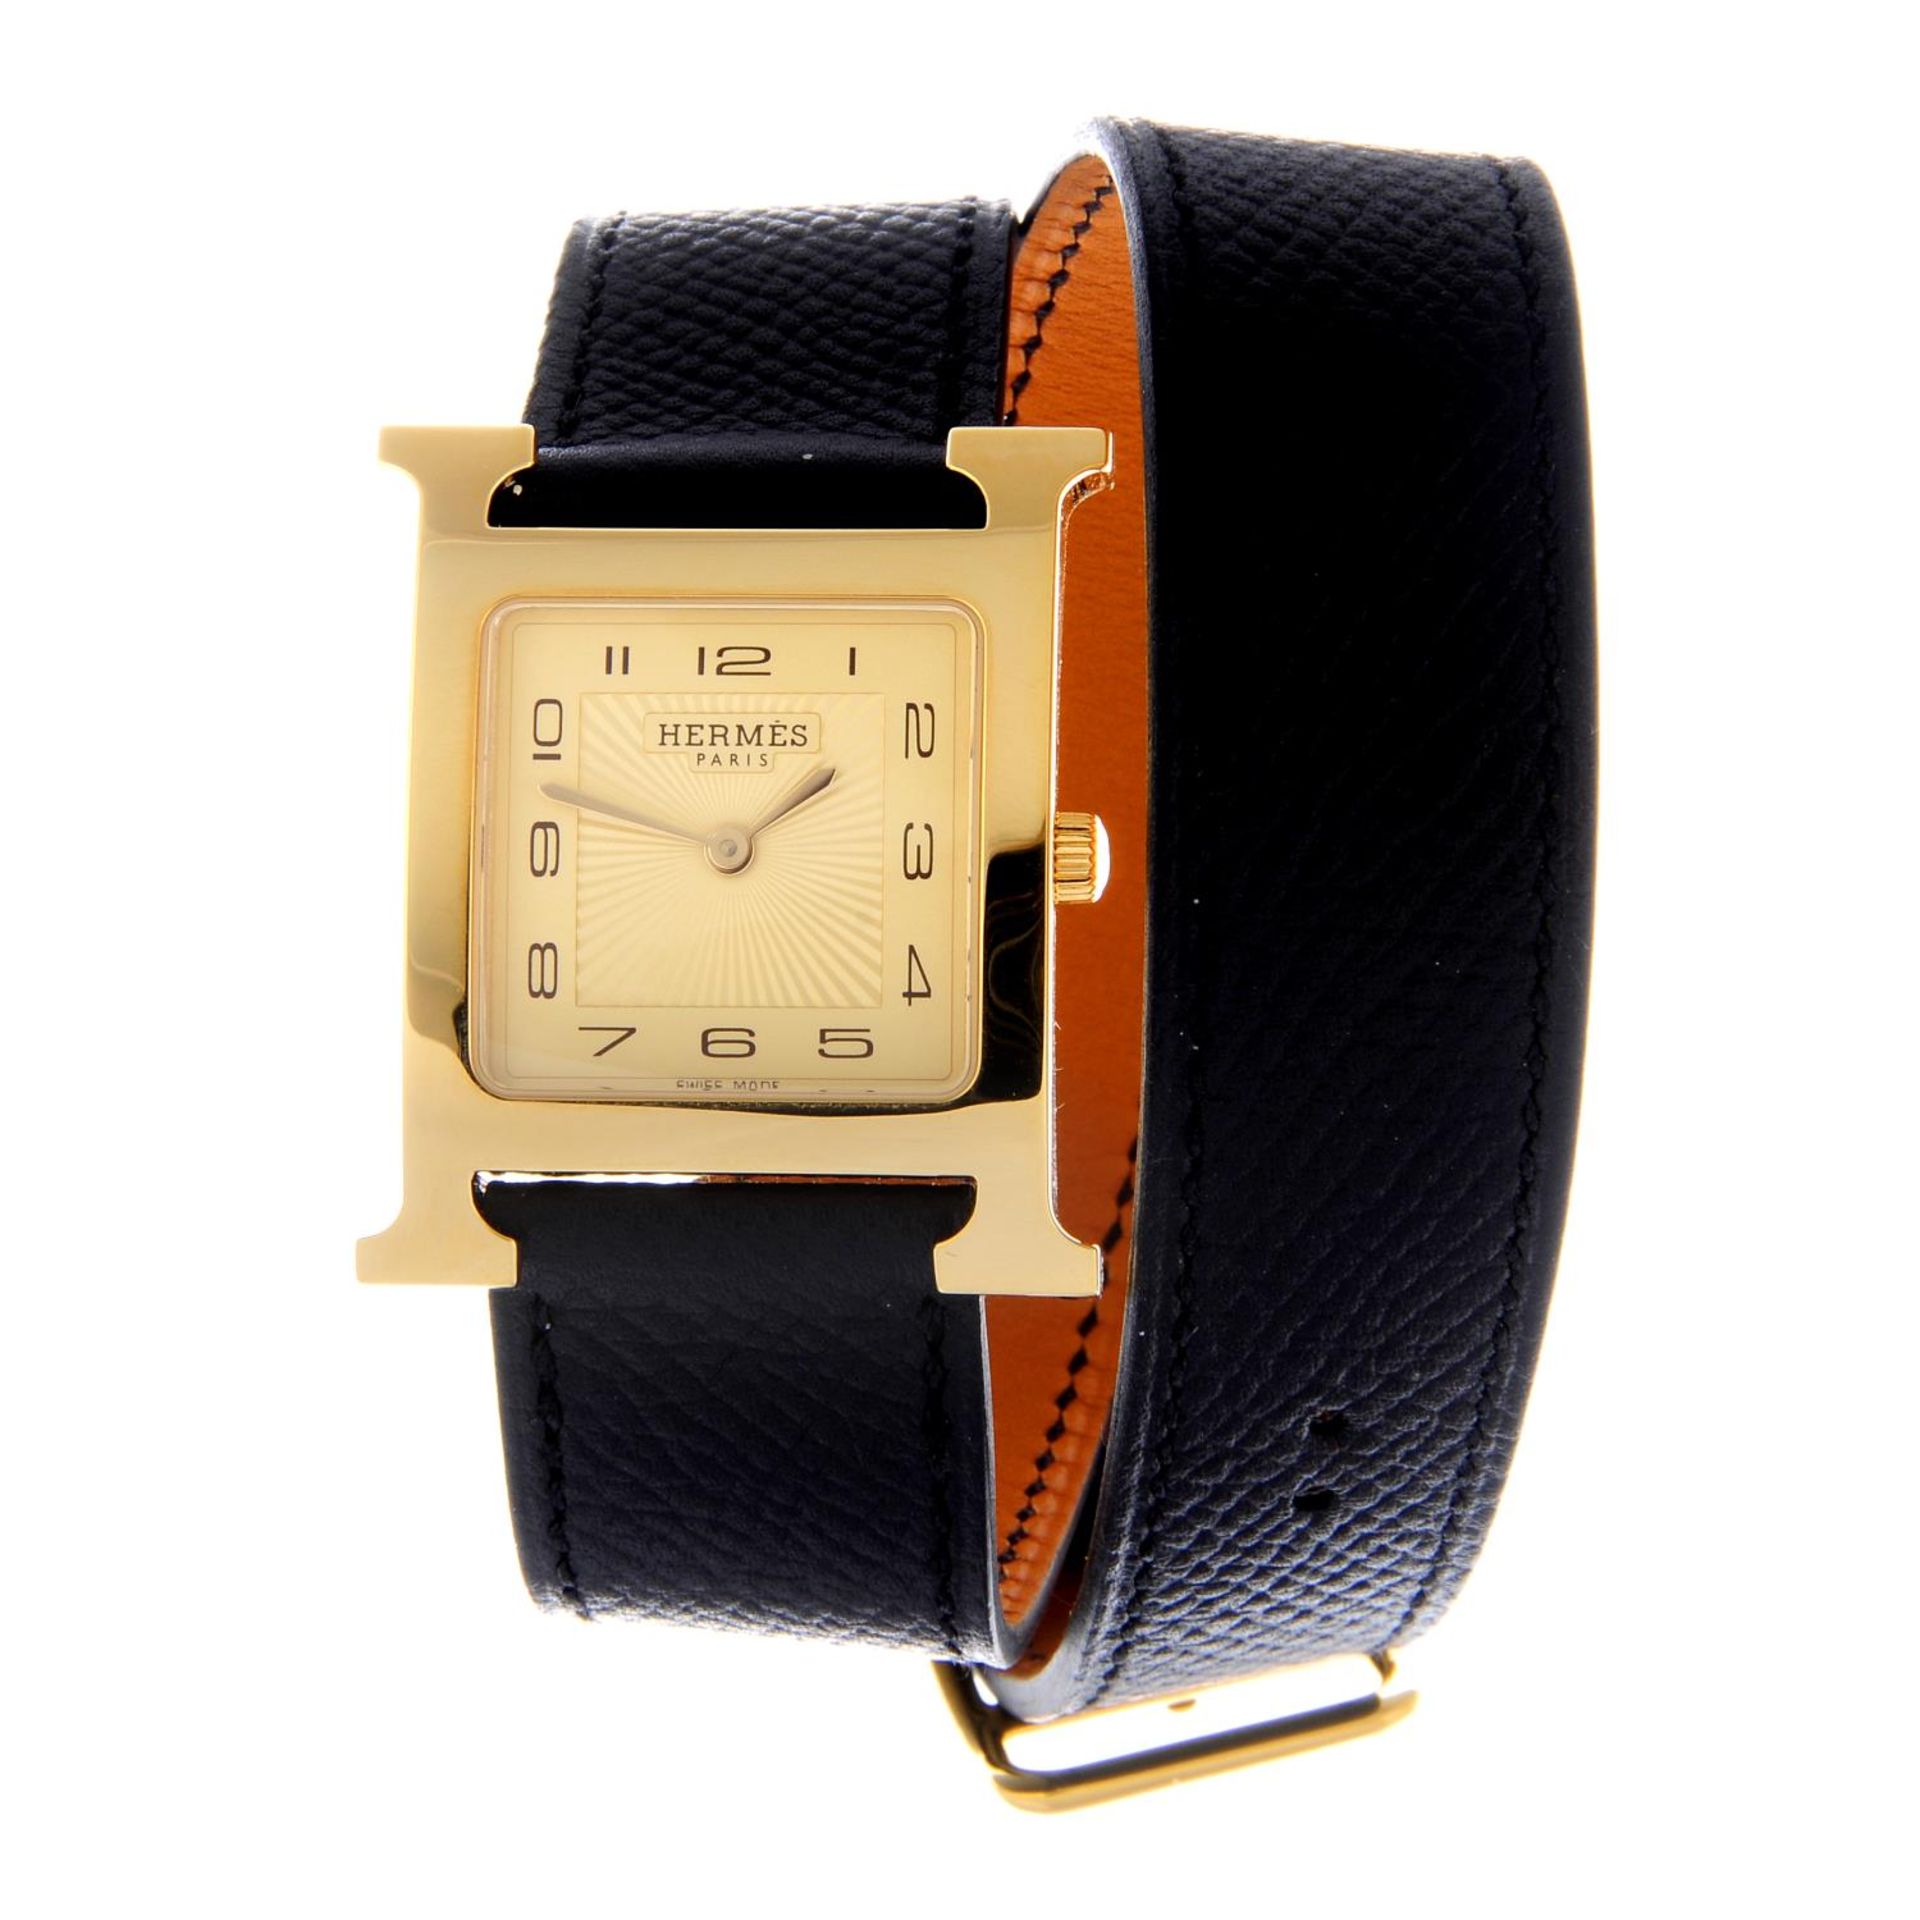 HERMÈS - a gentleman's H wrist watch. Gold plated case with stainless steel case back. Reference